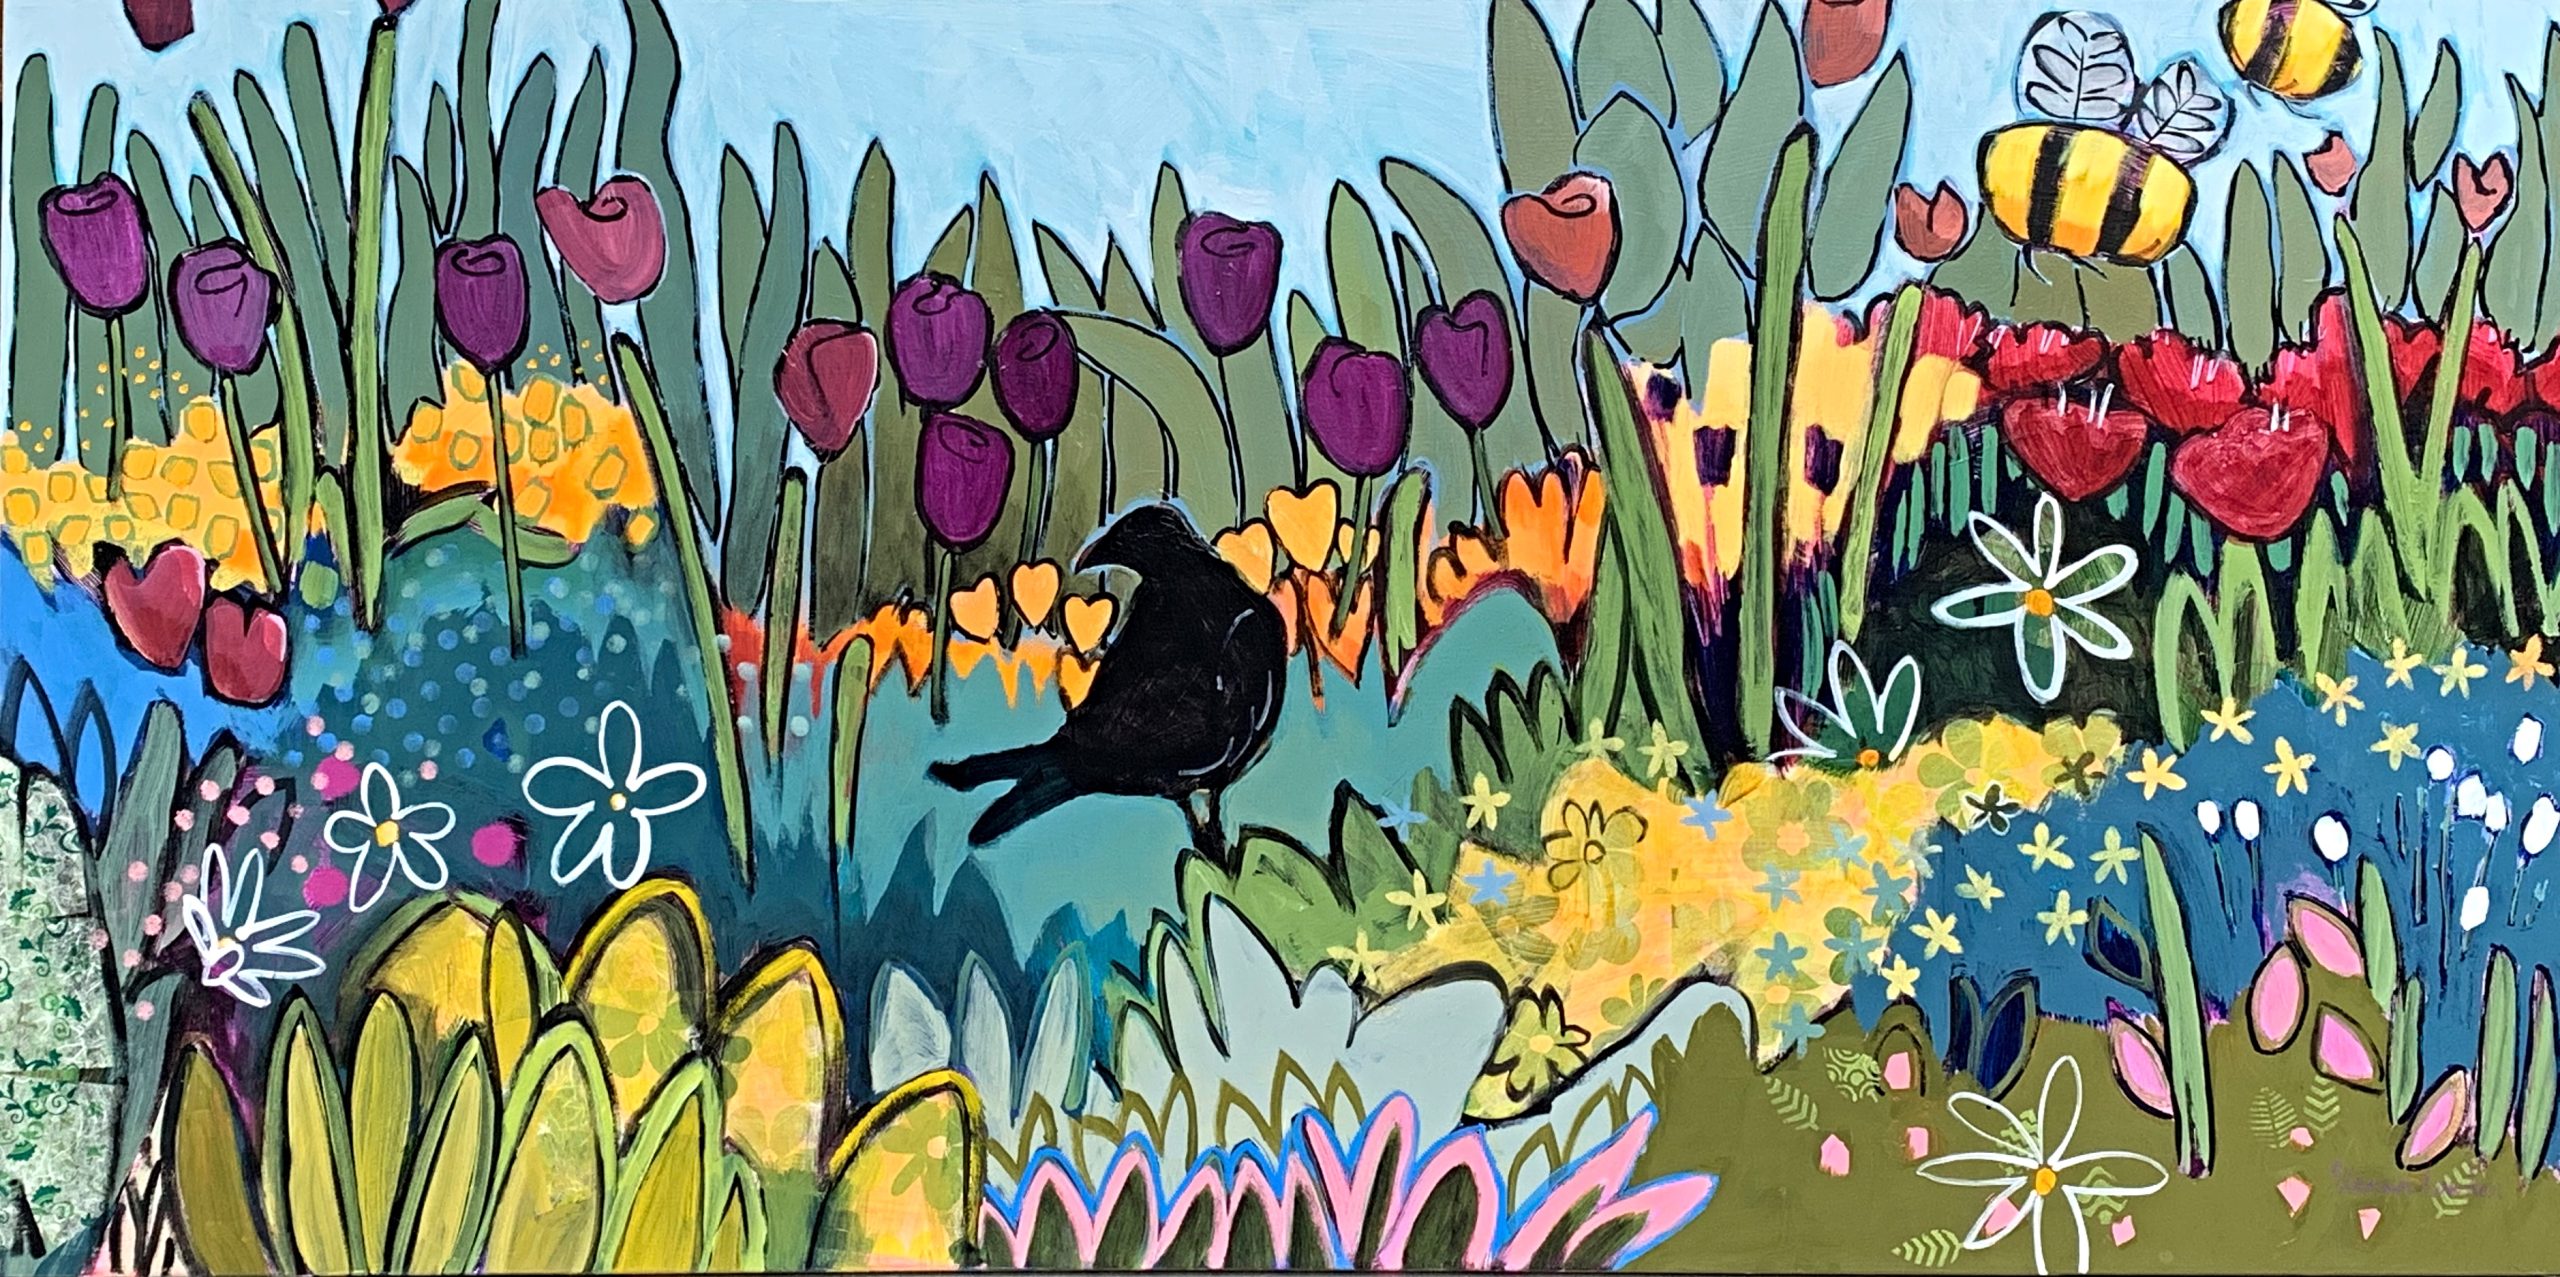 What a Wonderful World, acrylic painting by Eleanor Lowden | Effusion Art Gallery + Cast Glass Studio, Invermere BC